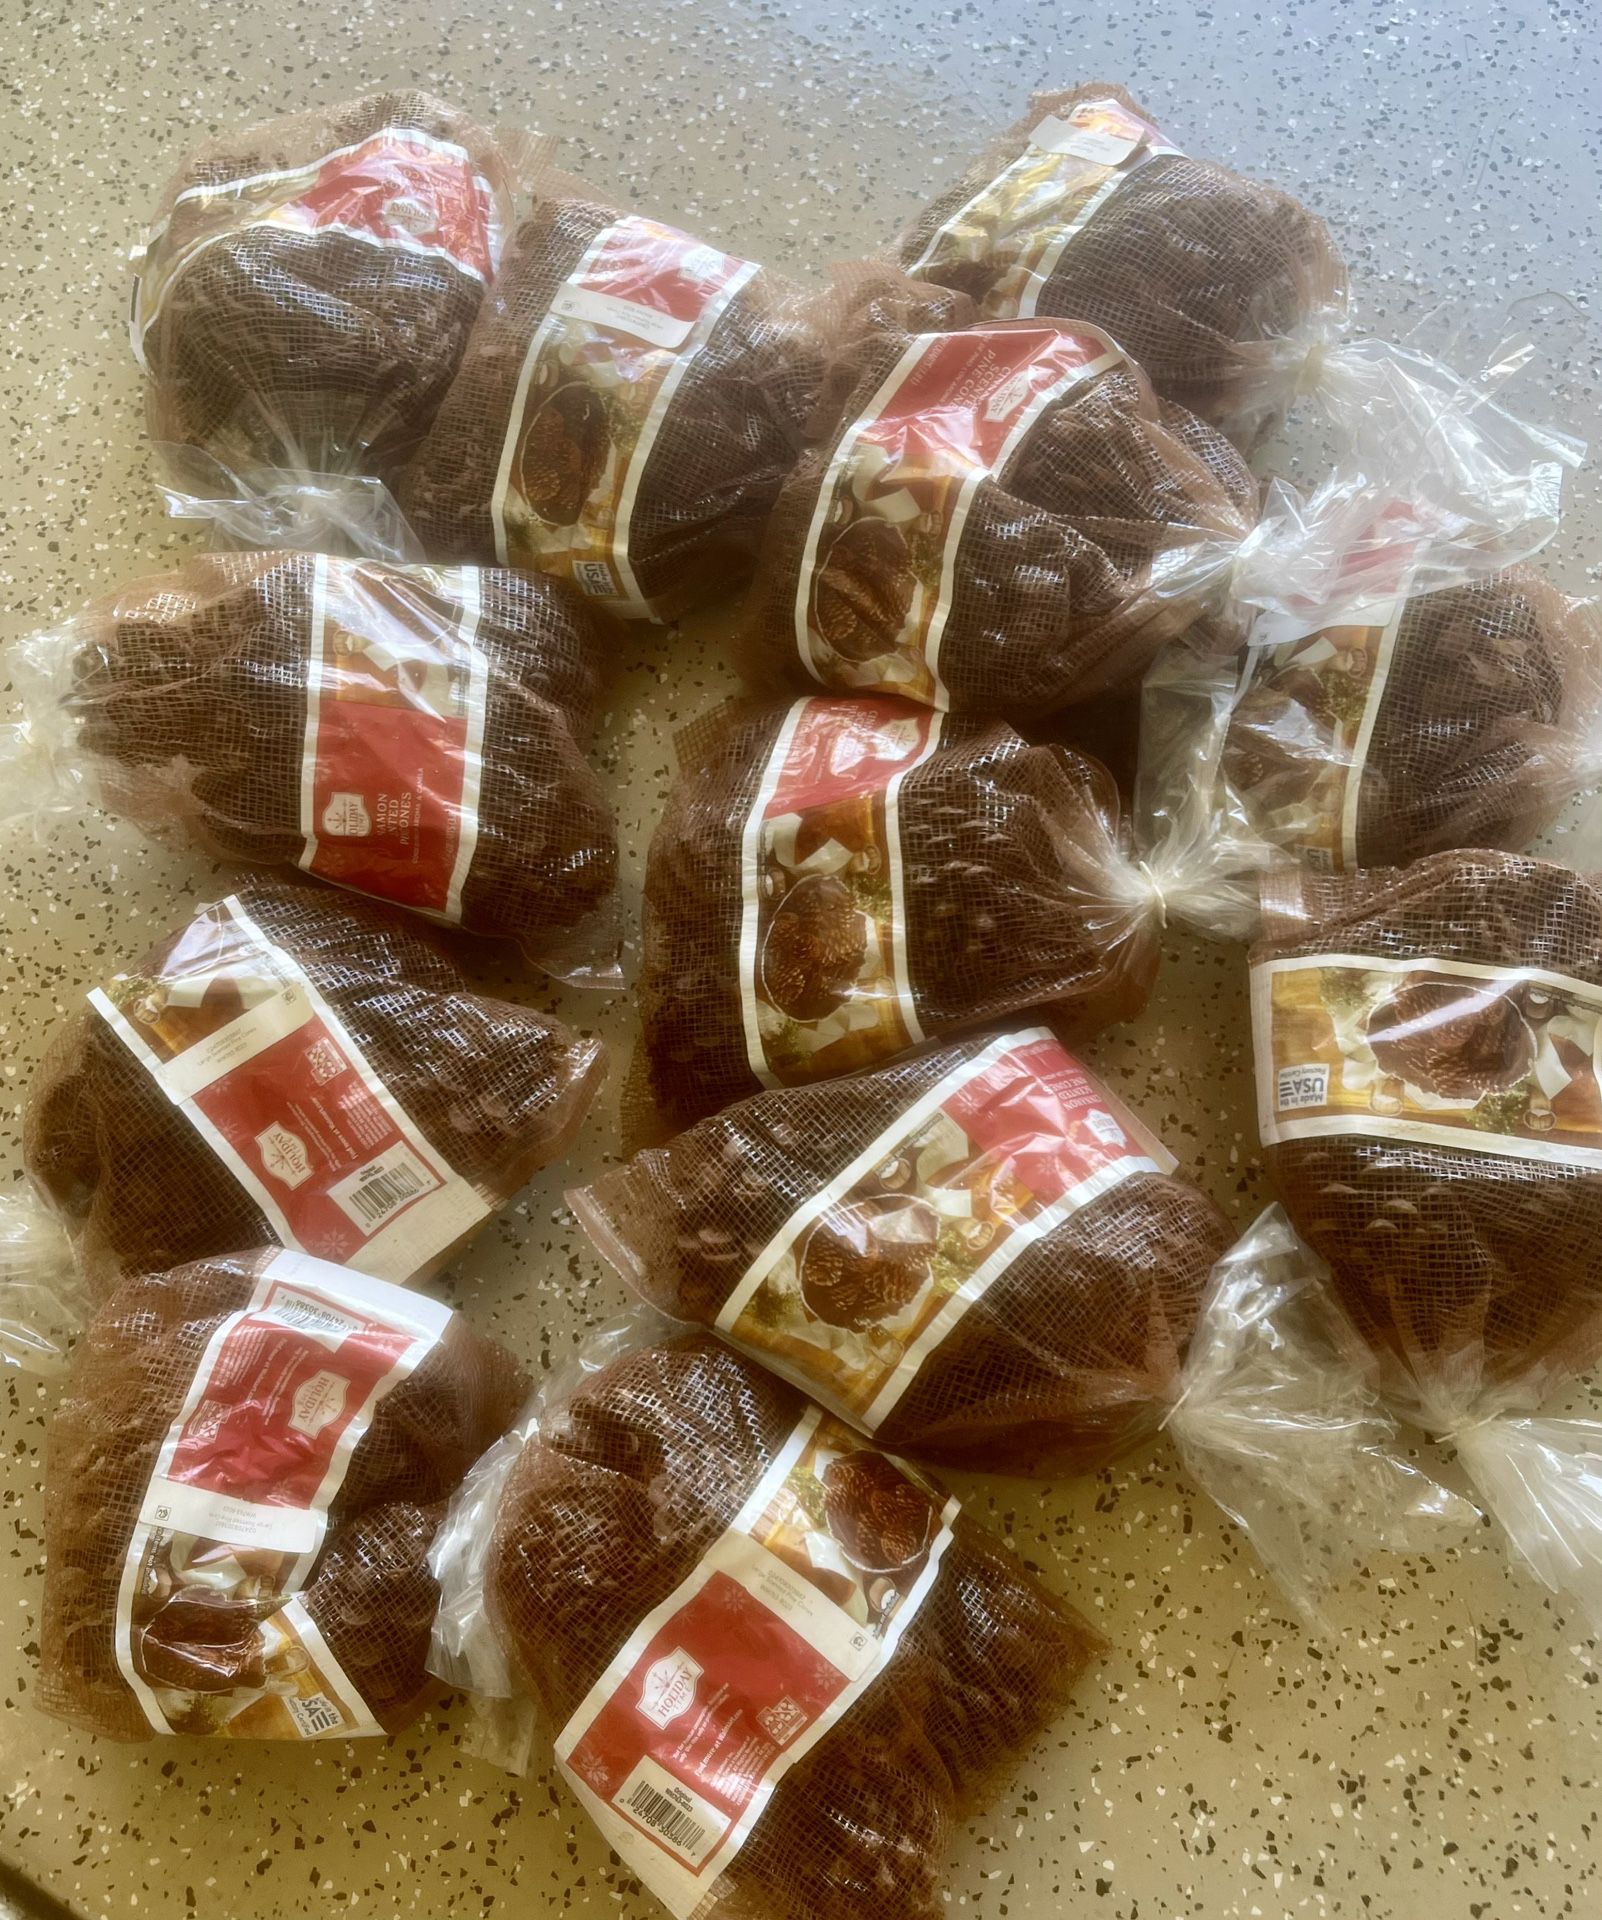 12 Bags Brand New Pine Cones-smell Amazing! $10 For All Cash